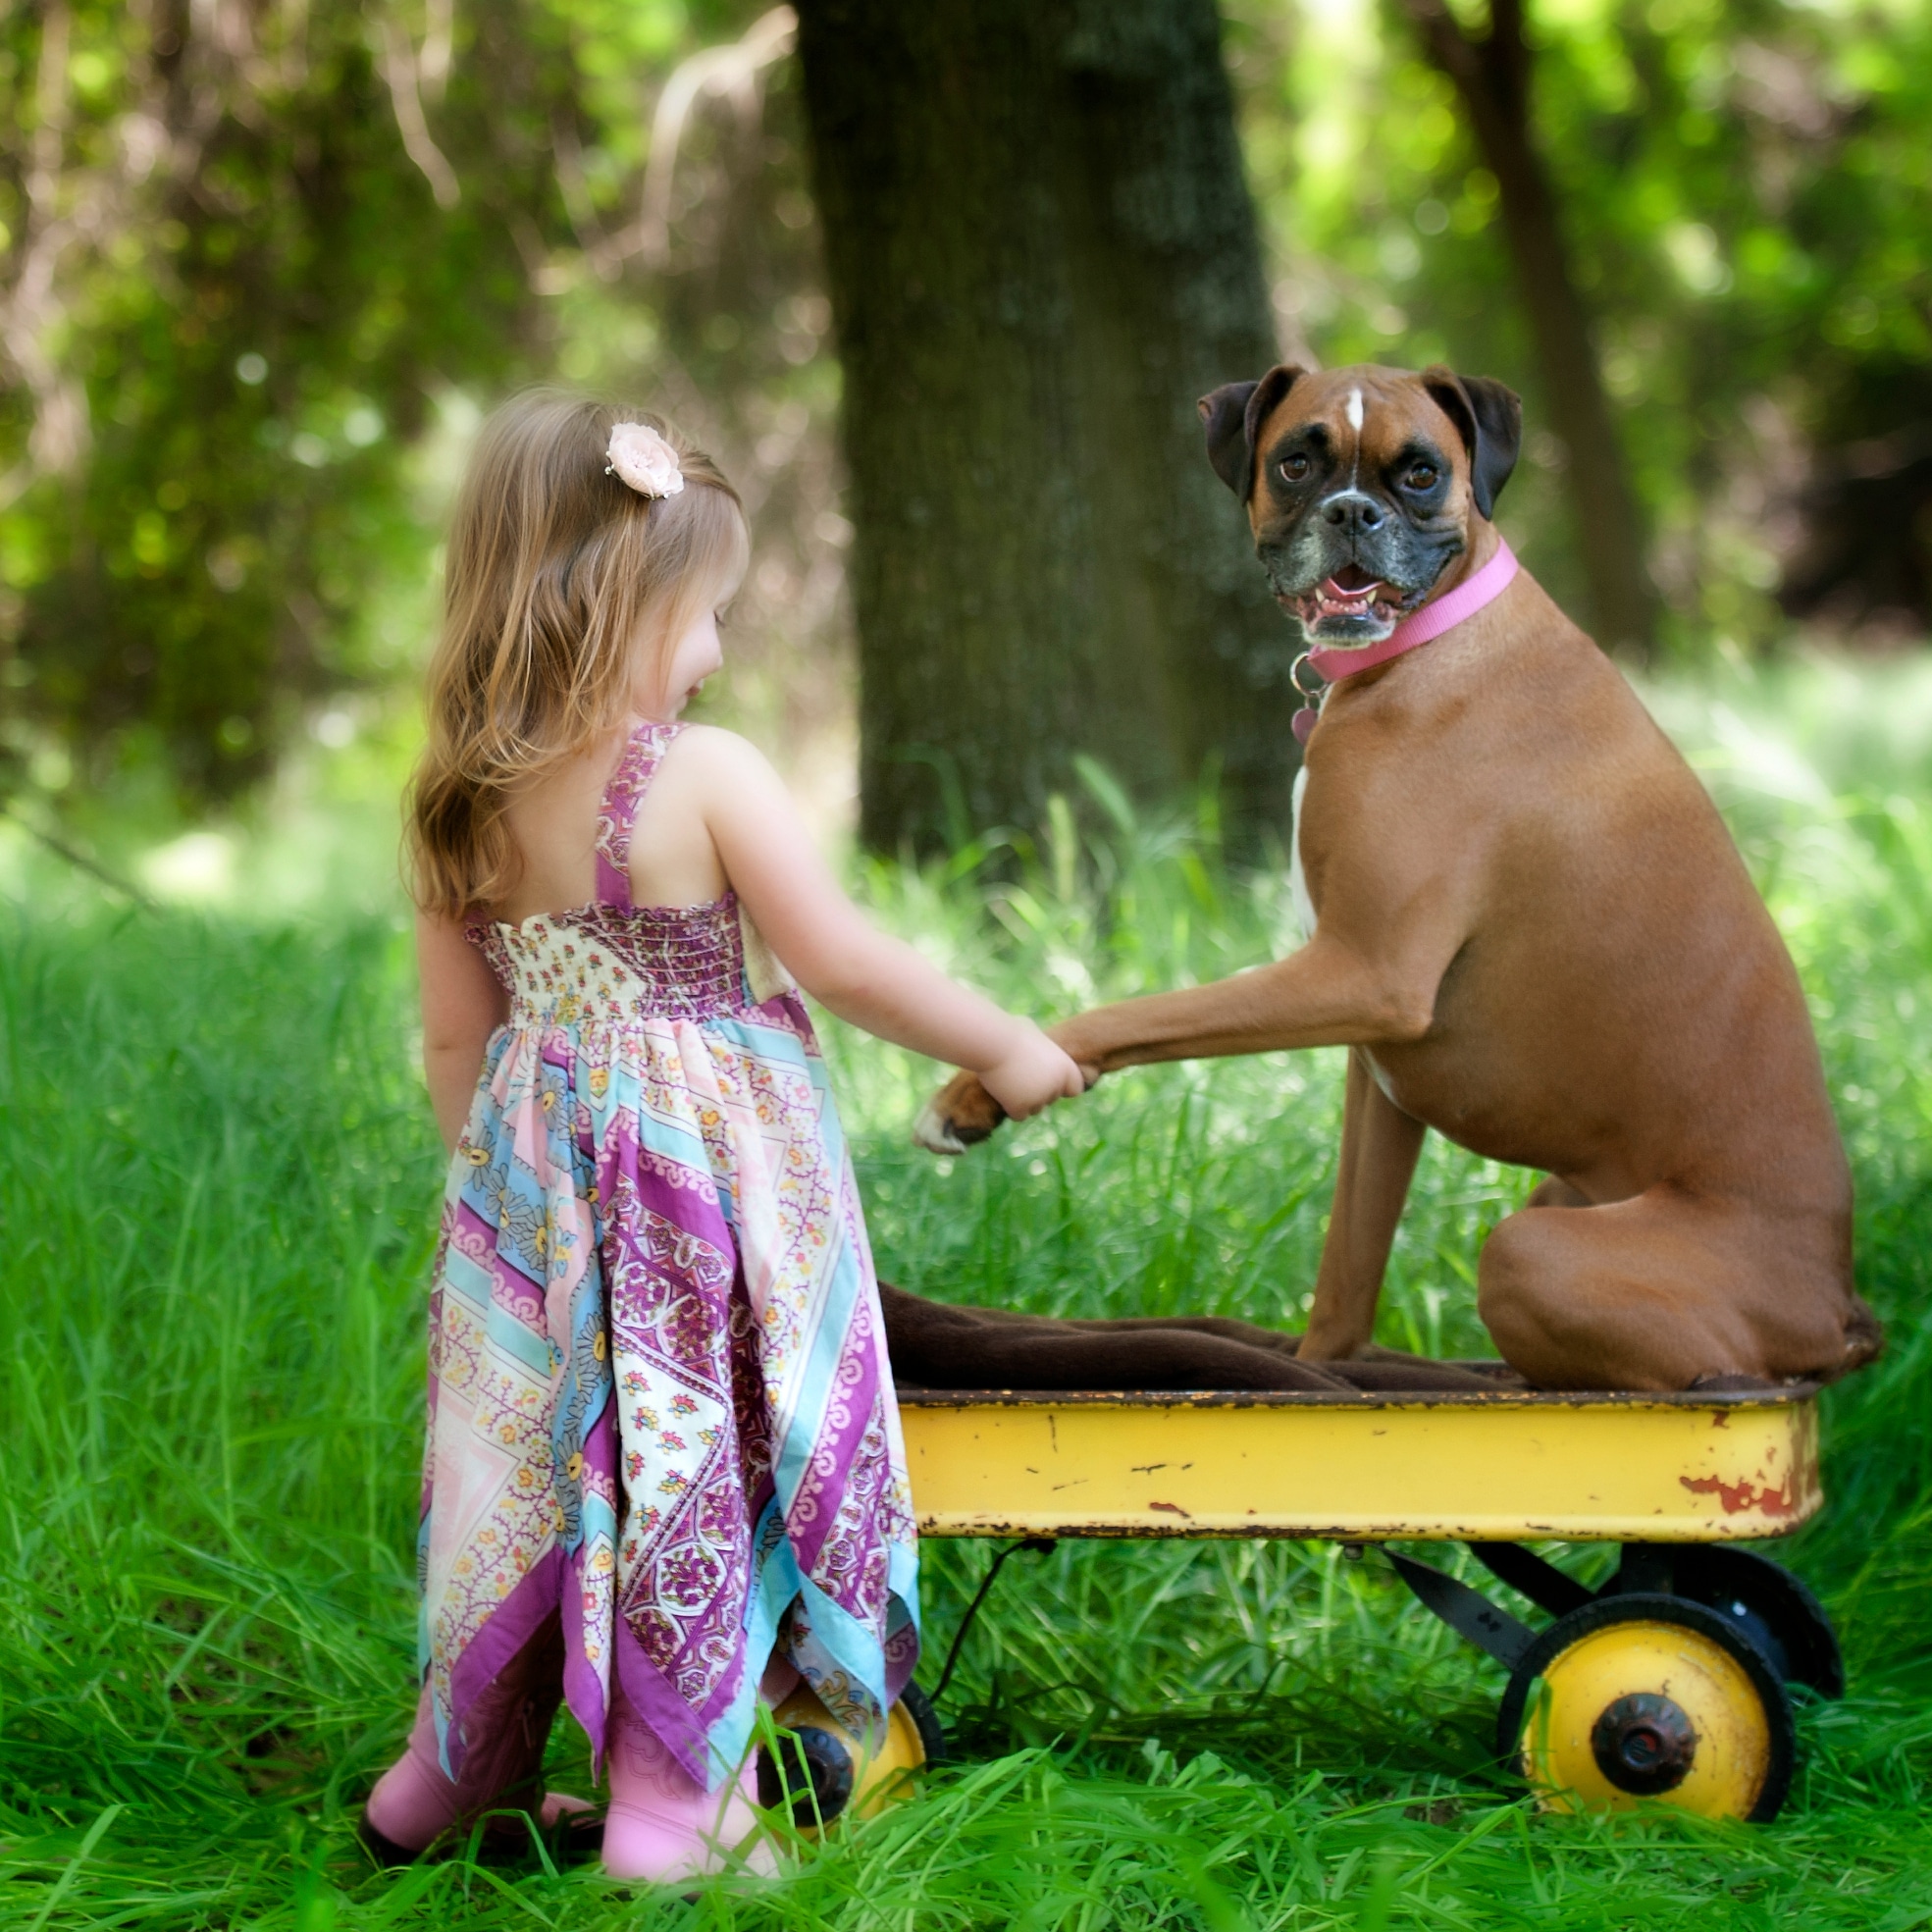 Can A Puppy Help Your Shy Child?